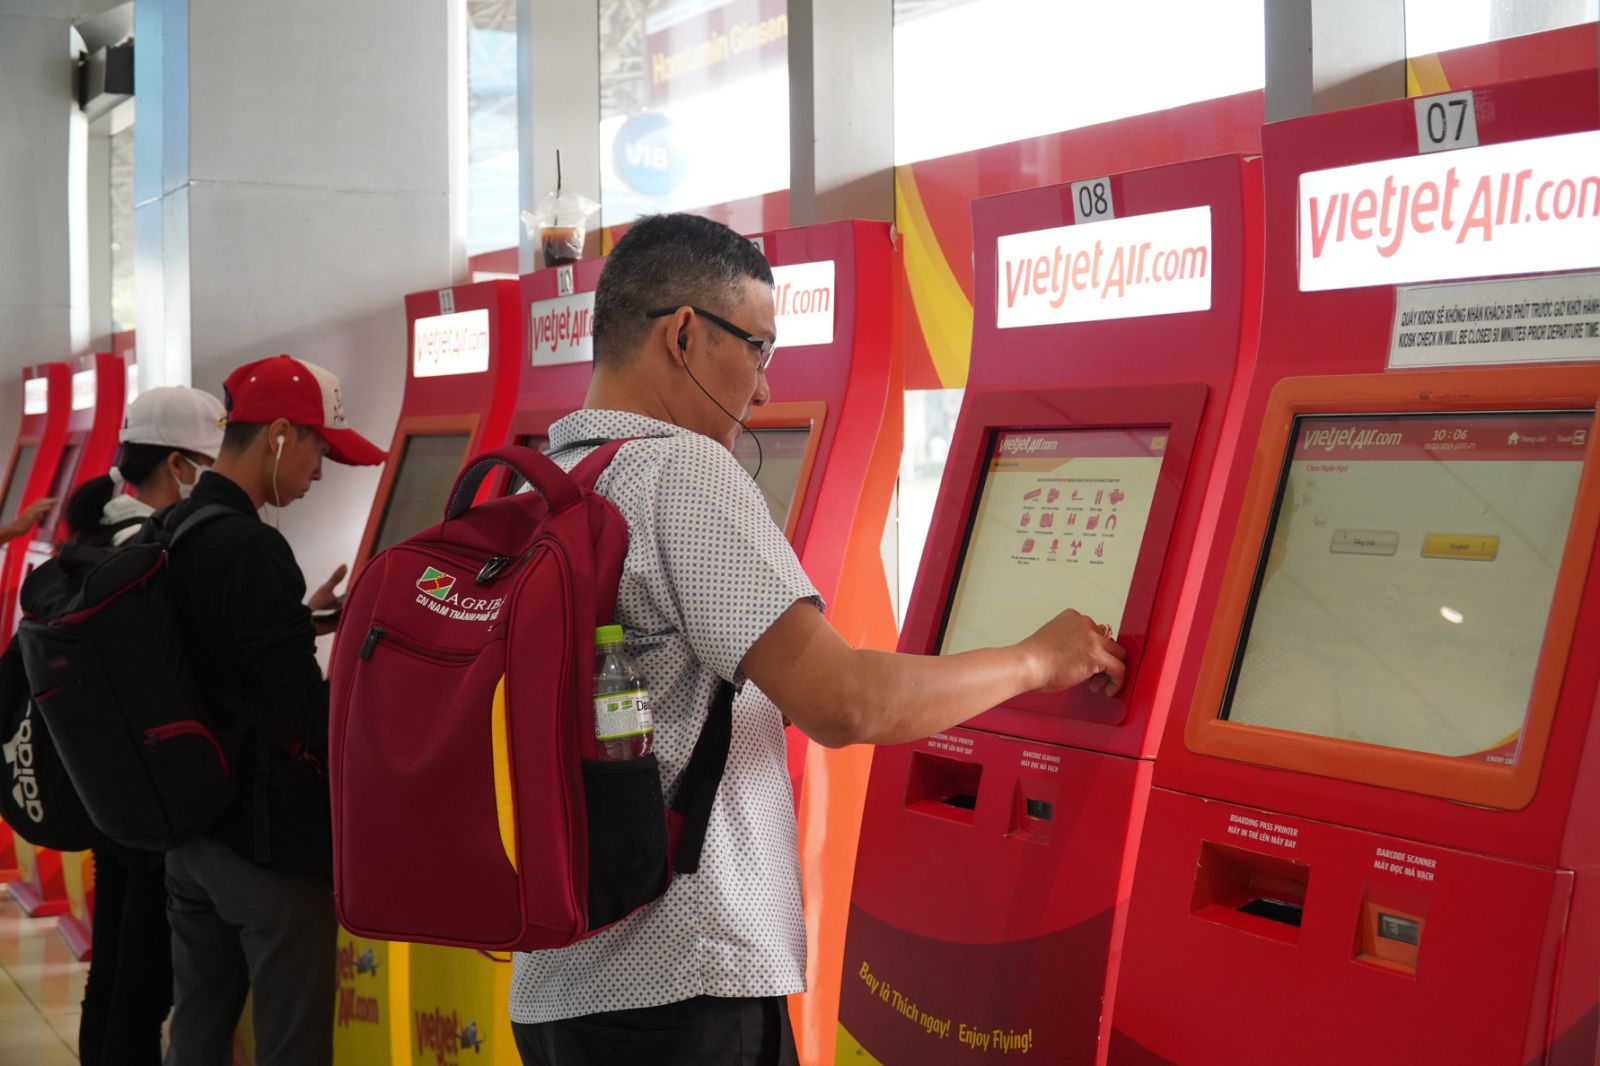 Vietnamese airlines boost online services amid fast-growing trend